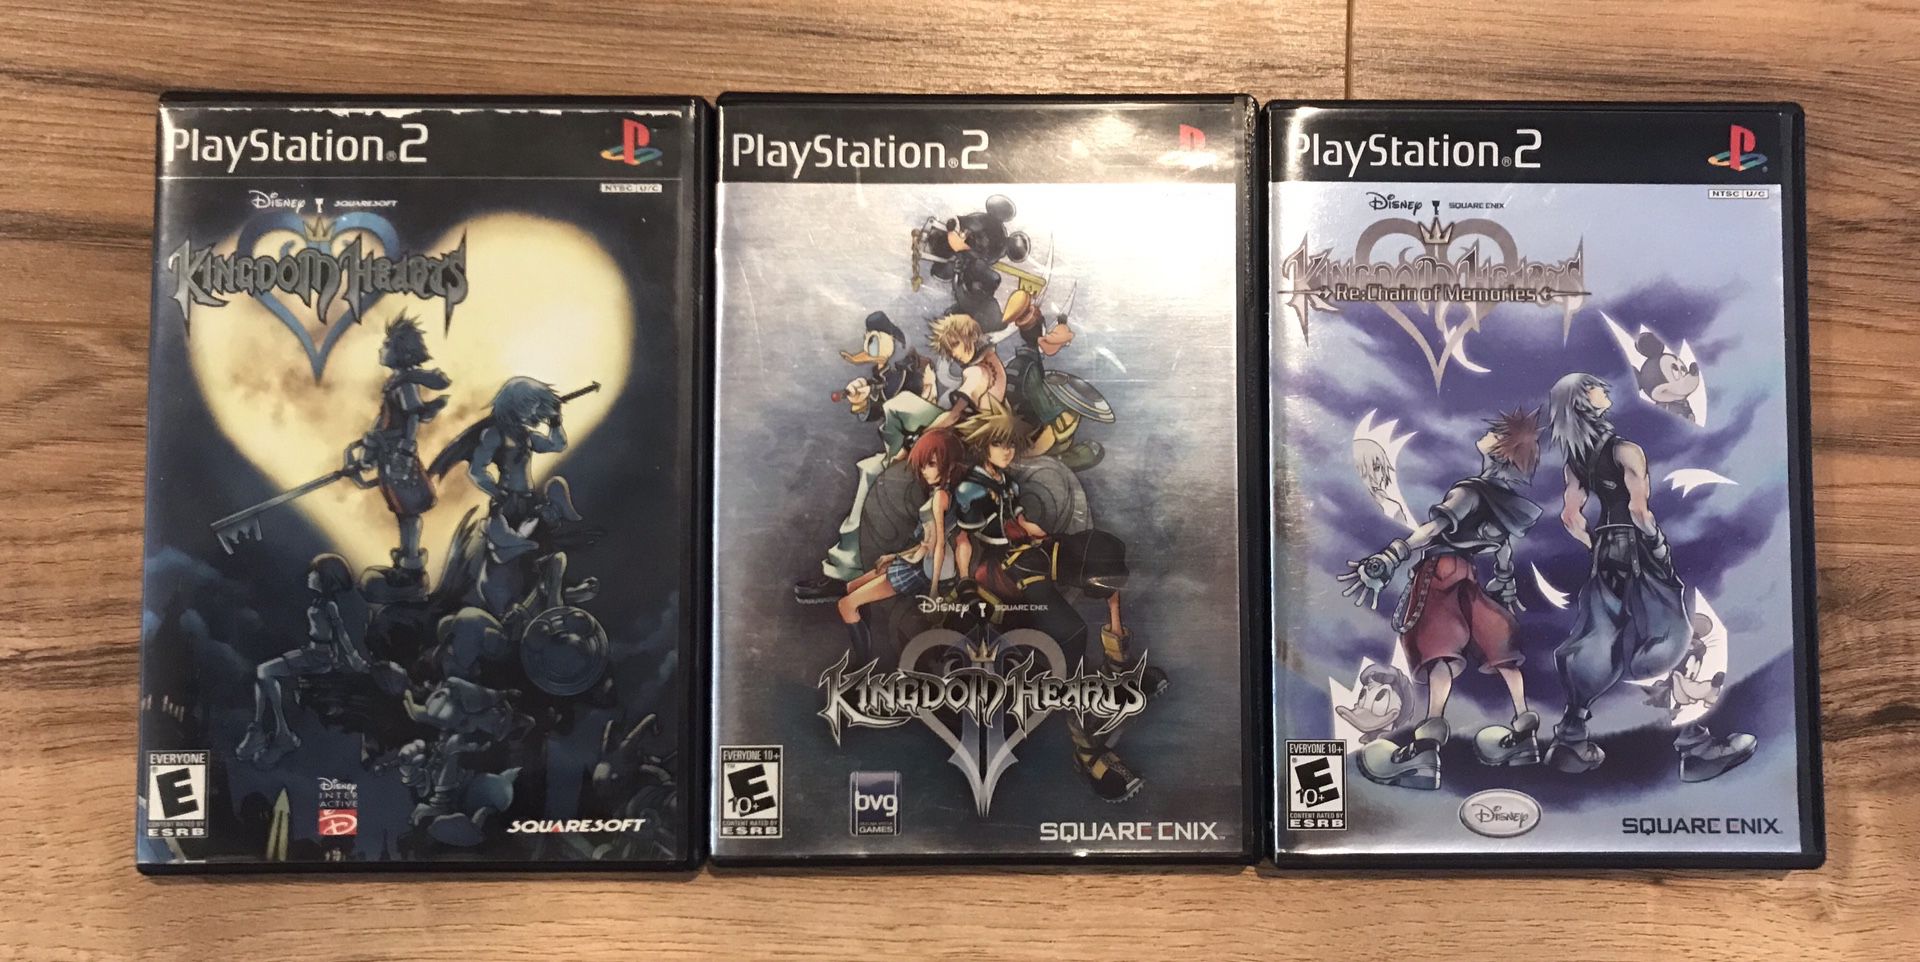 Kingdom Hearts , Kingdom Hearts II, & Kingdom Hearts RE: Chains of Memories